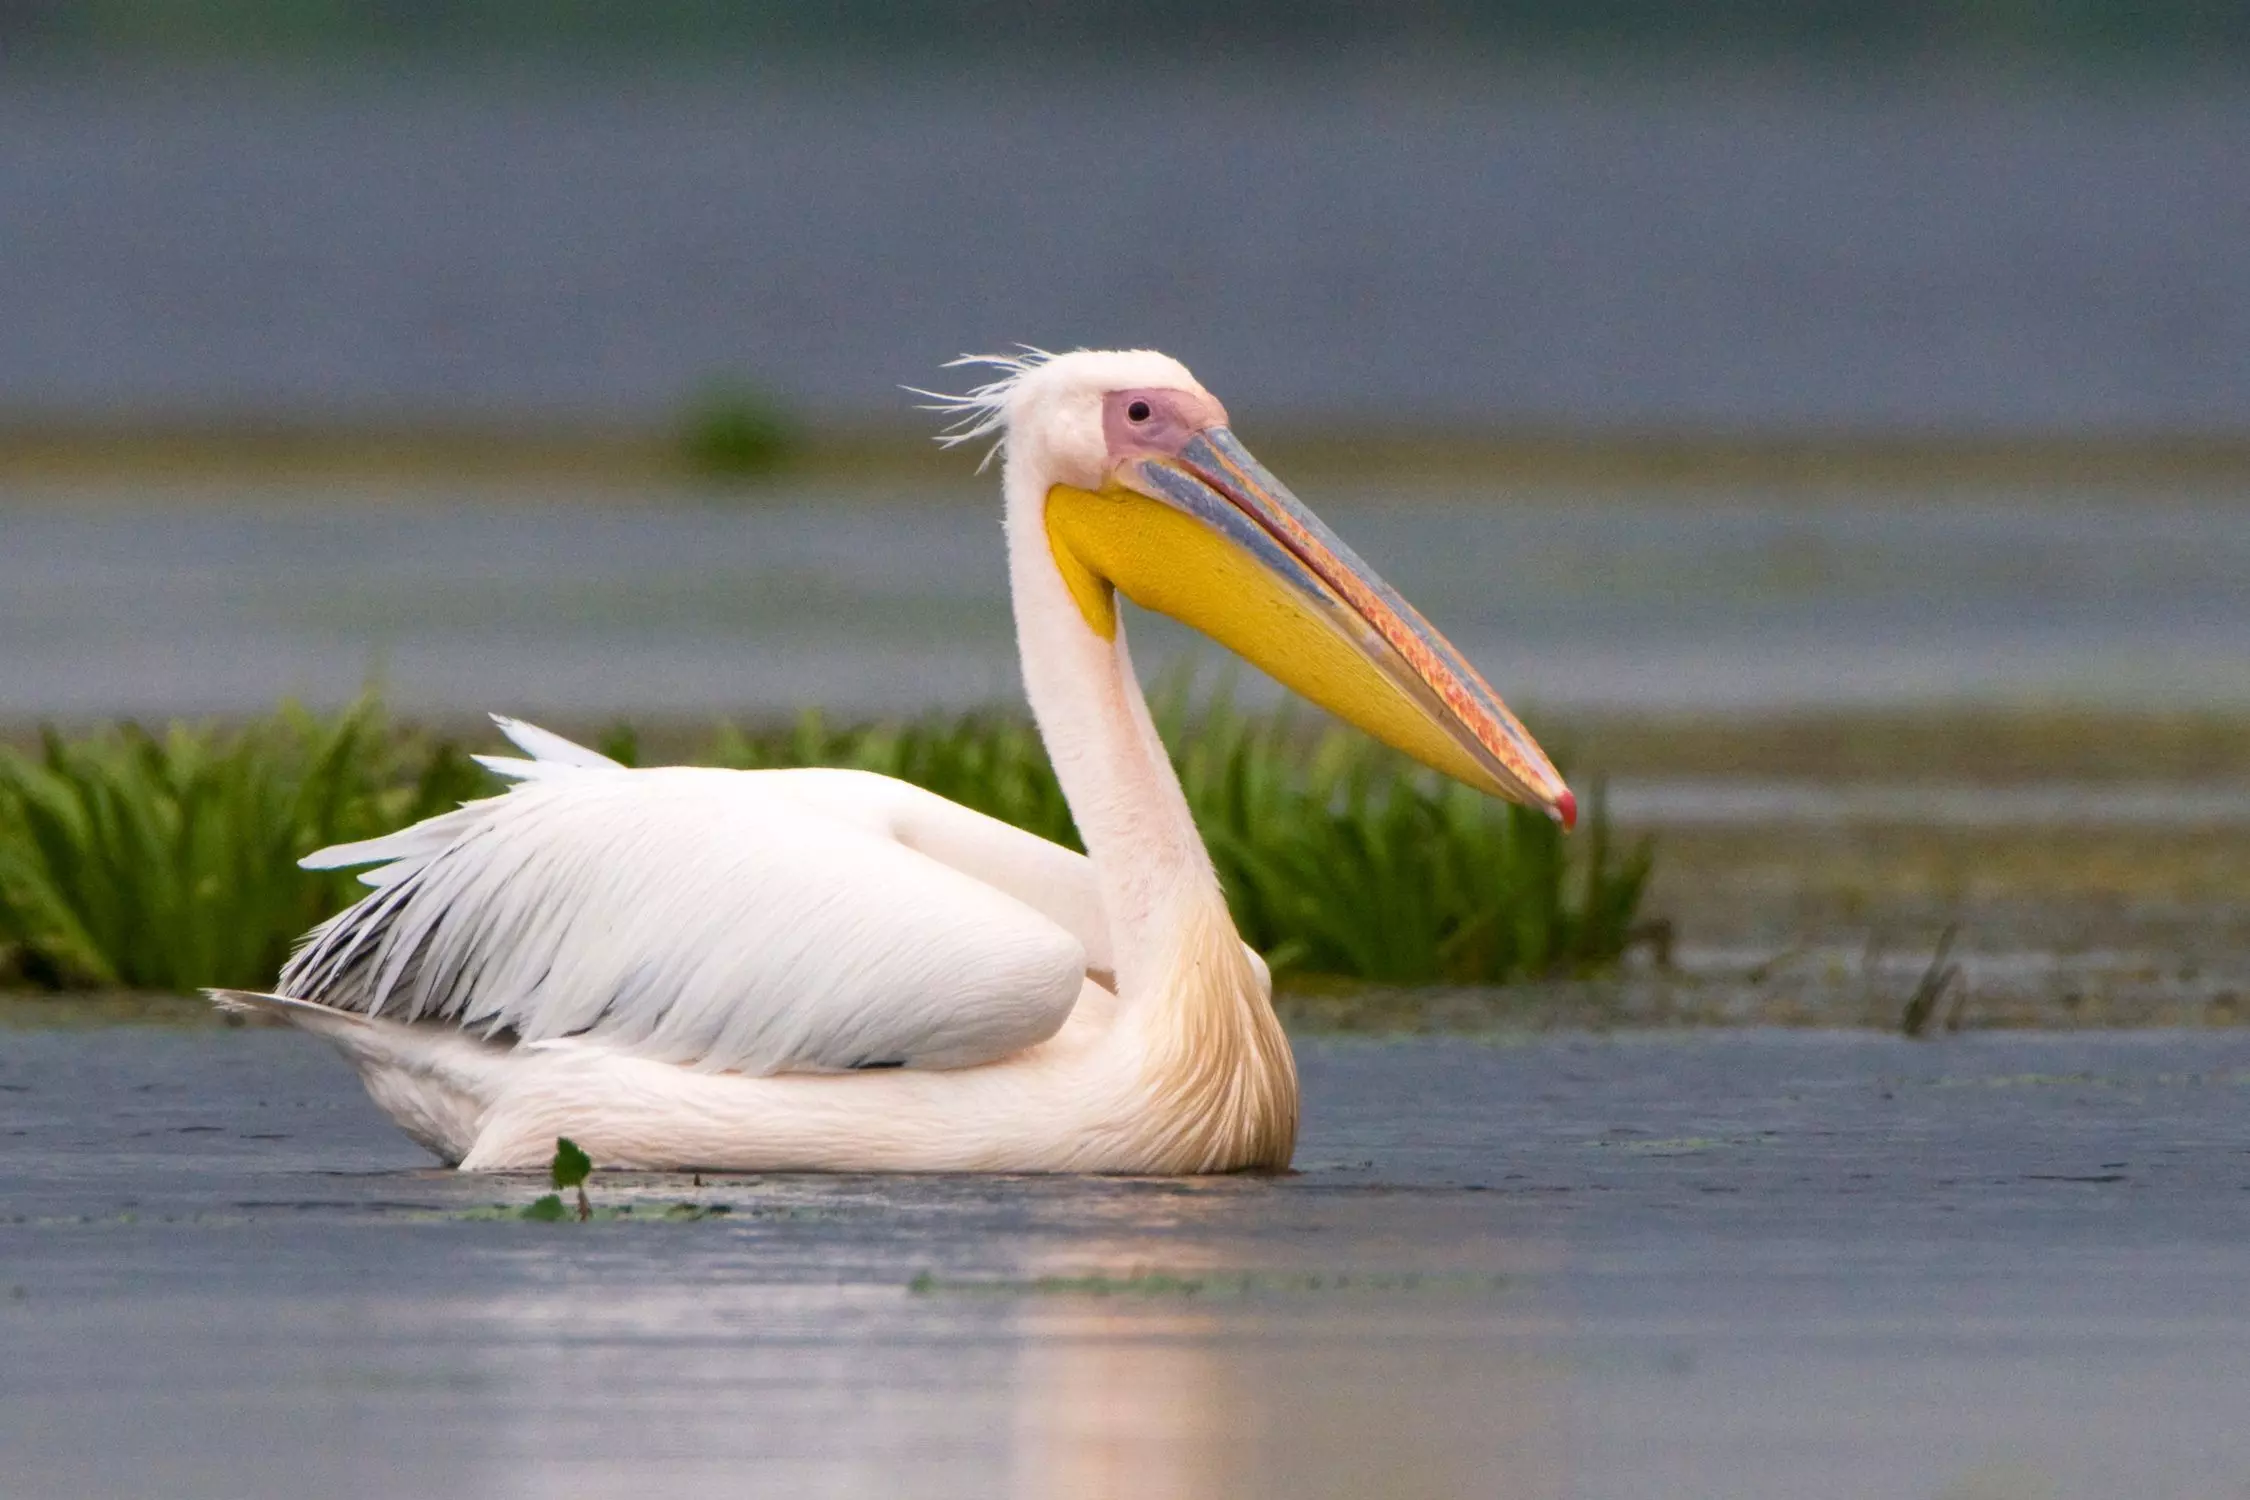 Scientists fit GPS on pelican wings to study migration